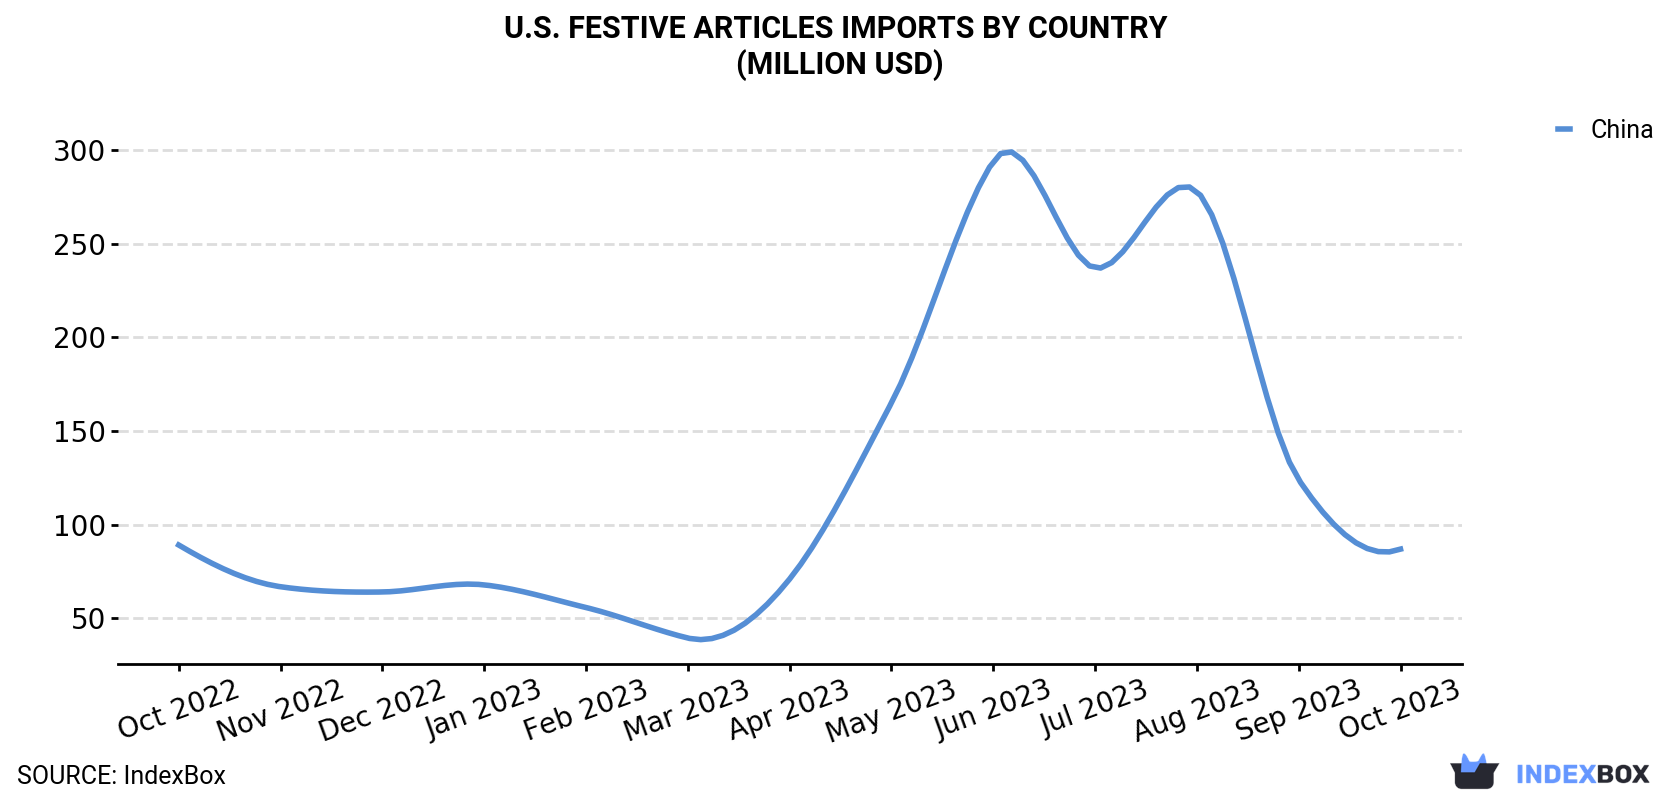 U.S. Festive Articles Imports By Country (Million USD)